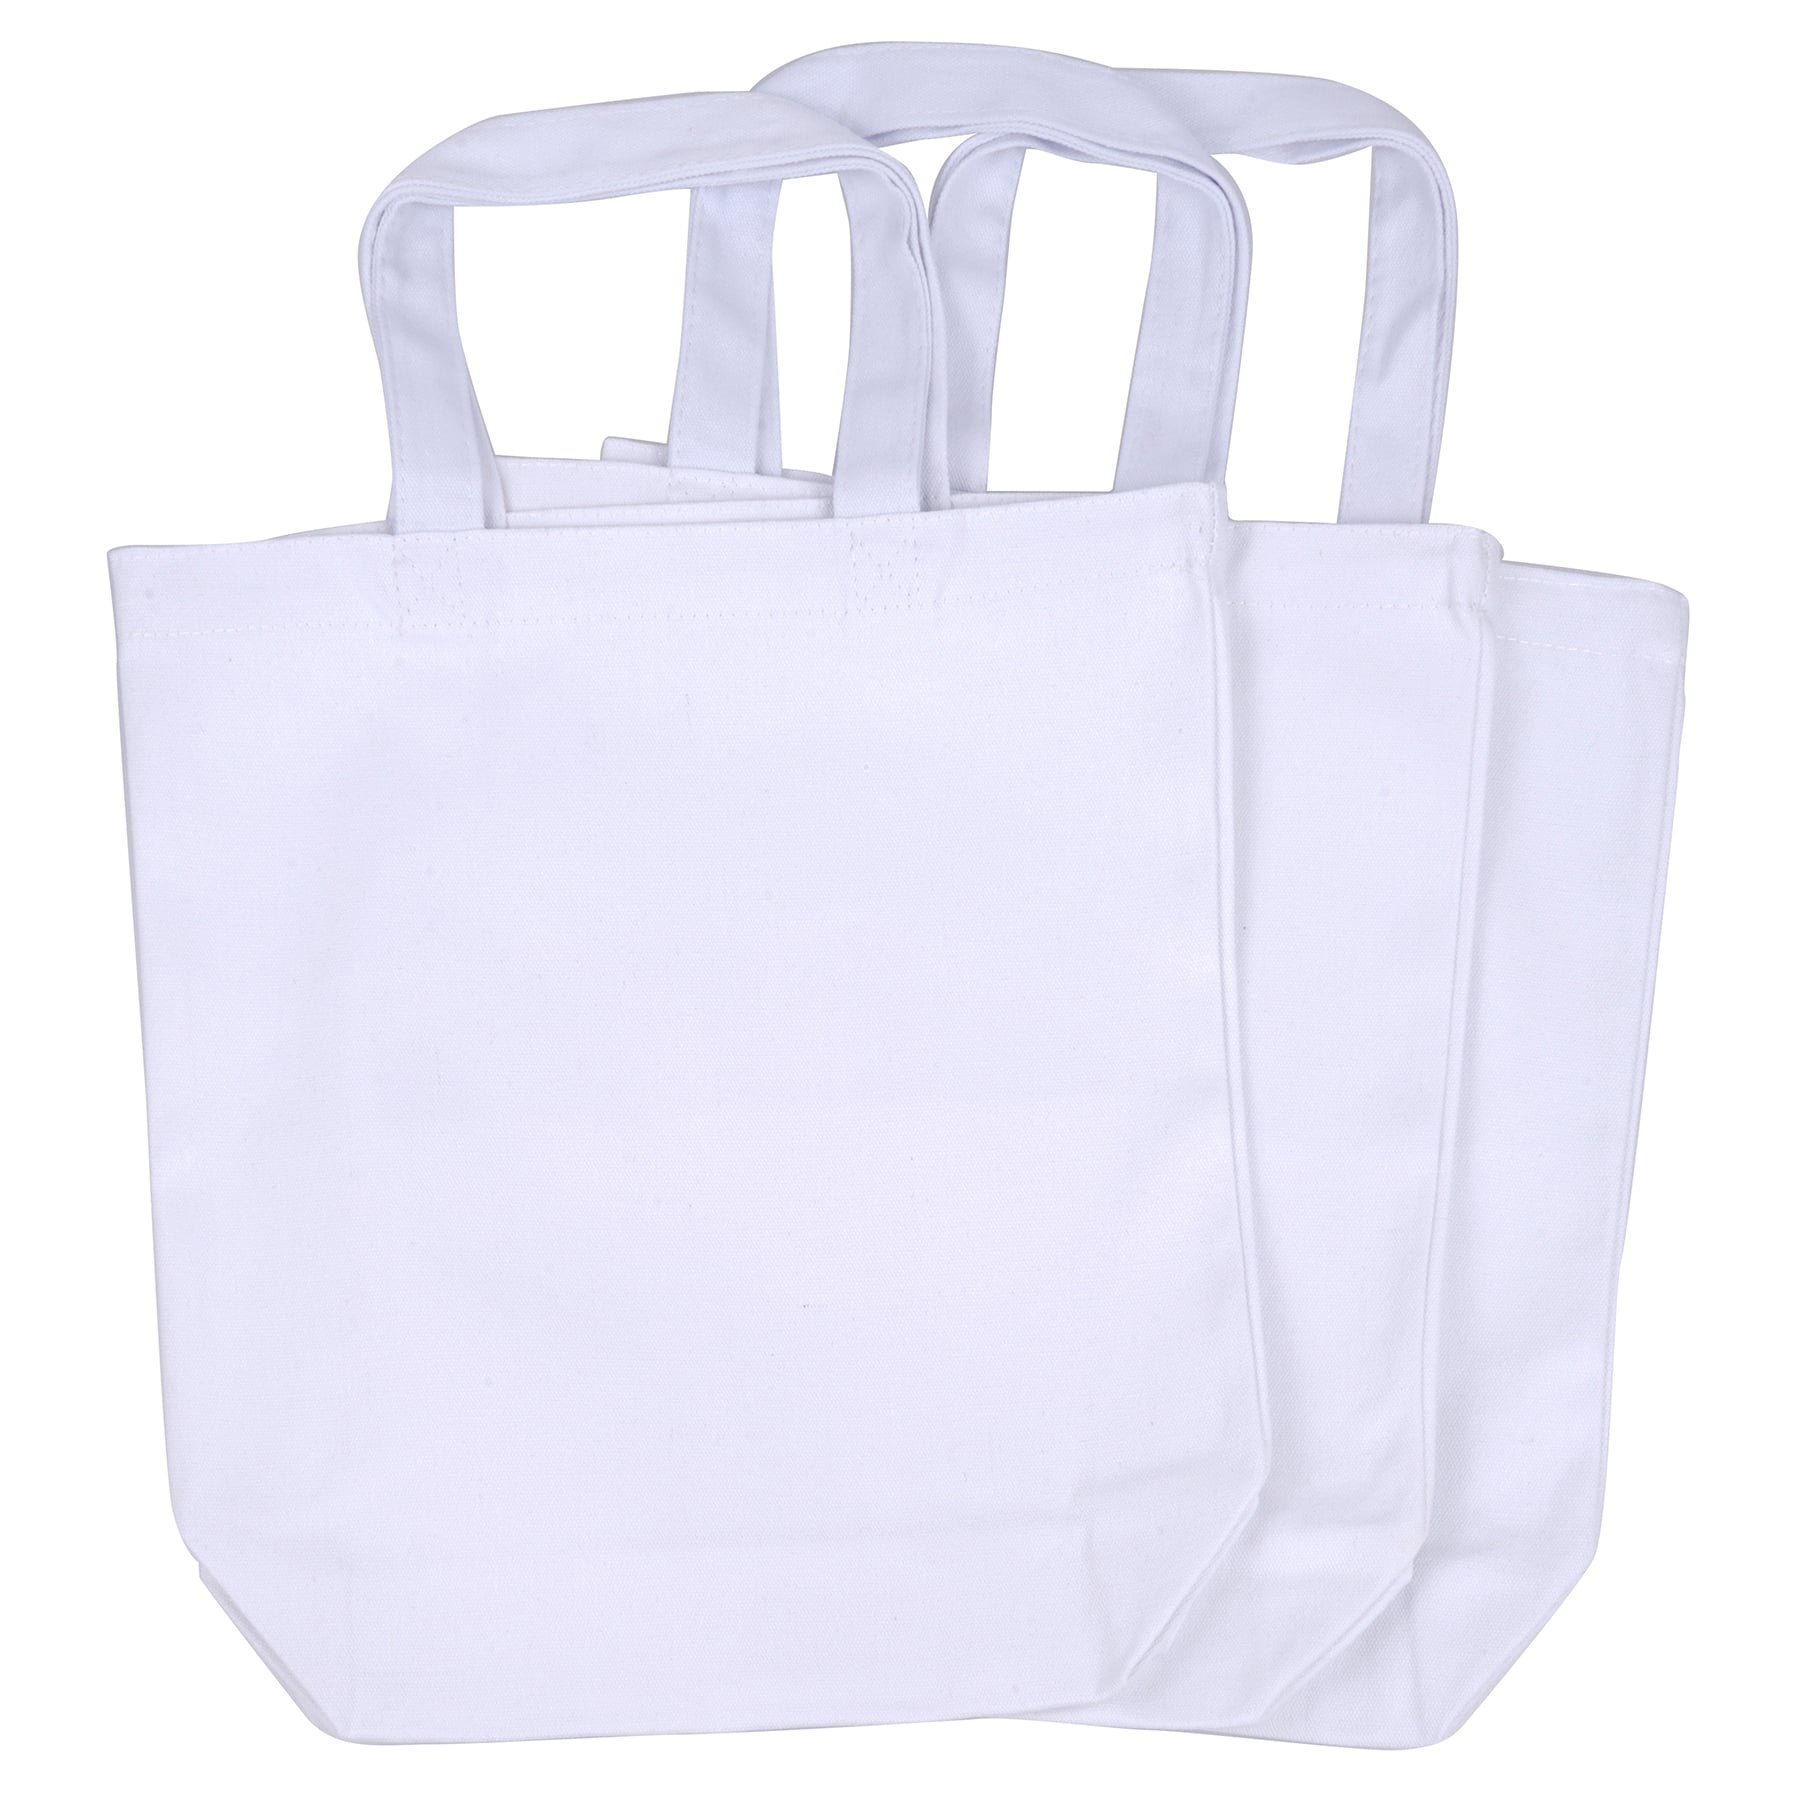 Tote Bag, Blank Canvas Tote Bags, 100% Cotton Canvas Tote Bags, Blank  Canvas Bags, Blank Arts and Crafts Bags 